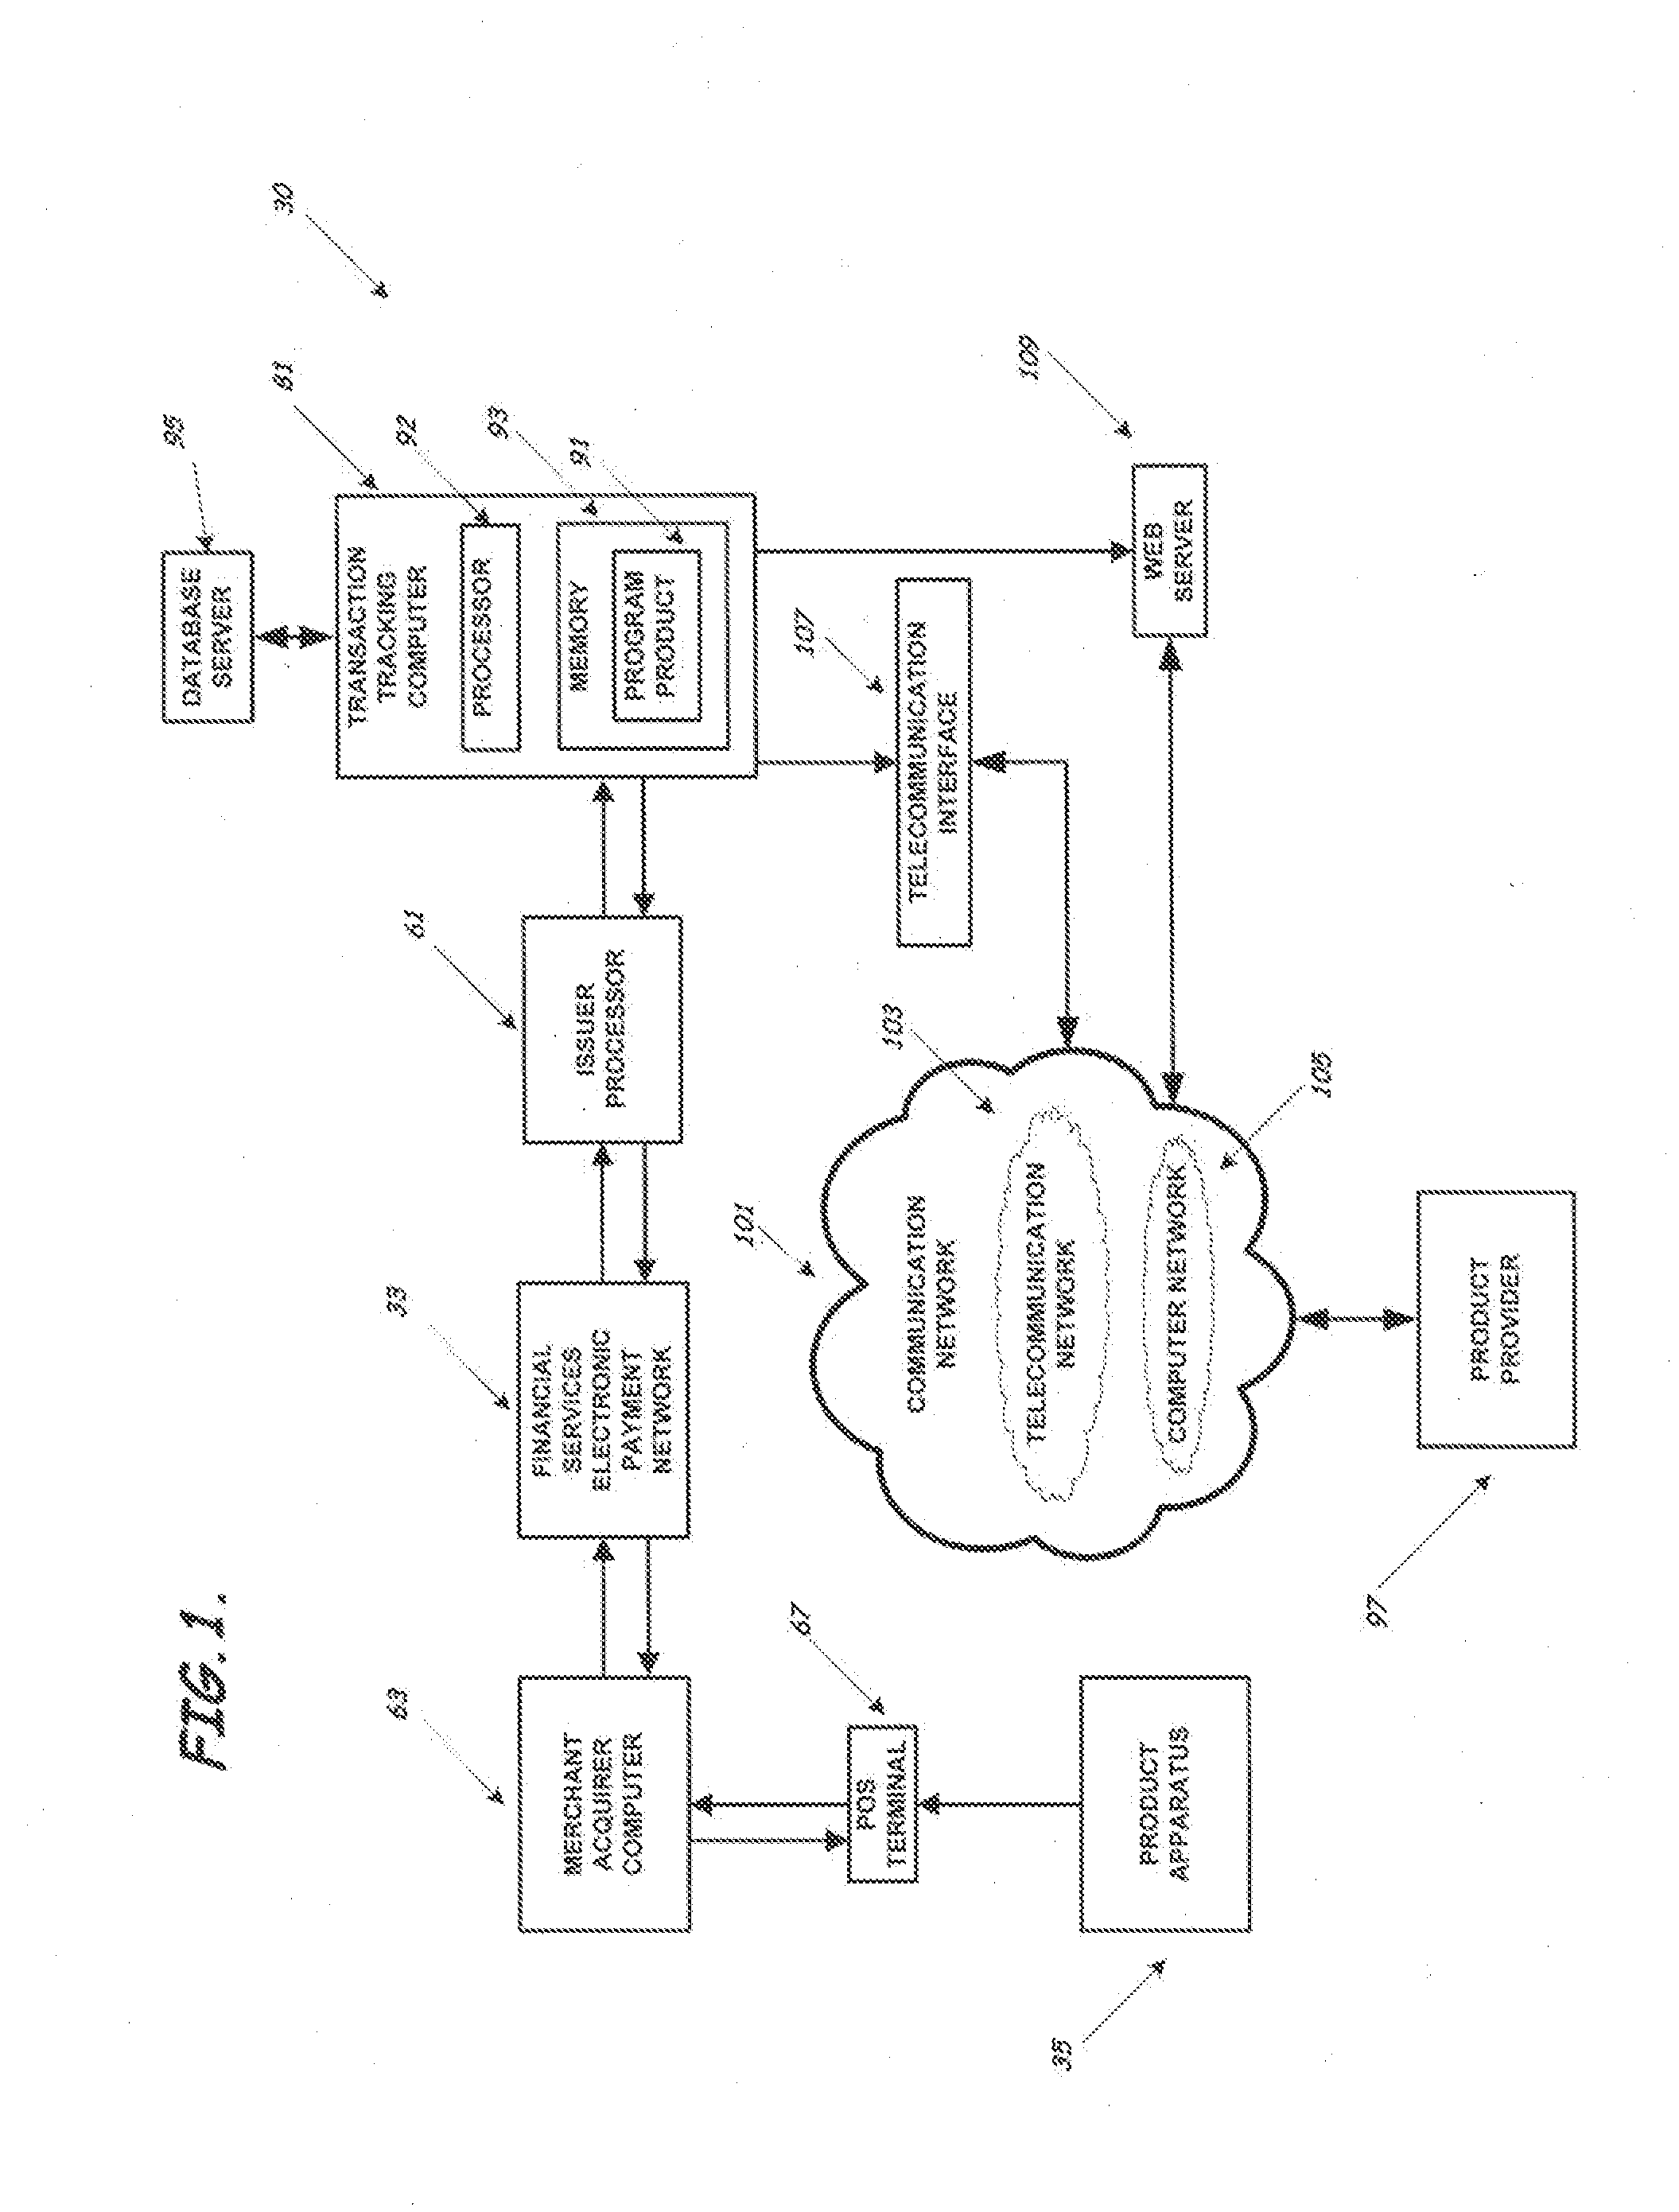 Machine, Methods, and Program Product for Electronic Inventory Tracking